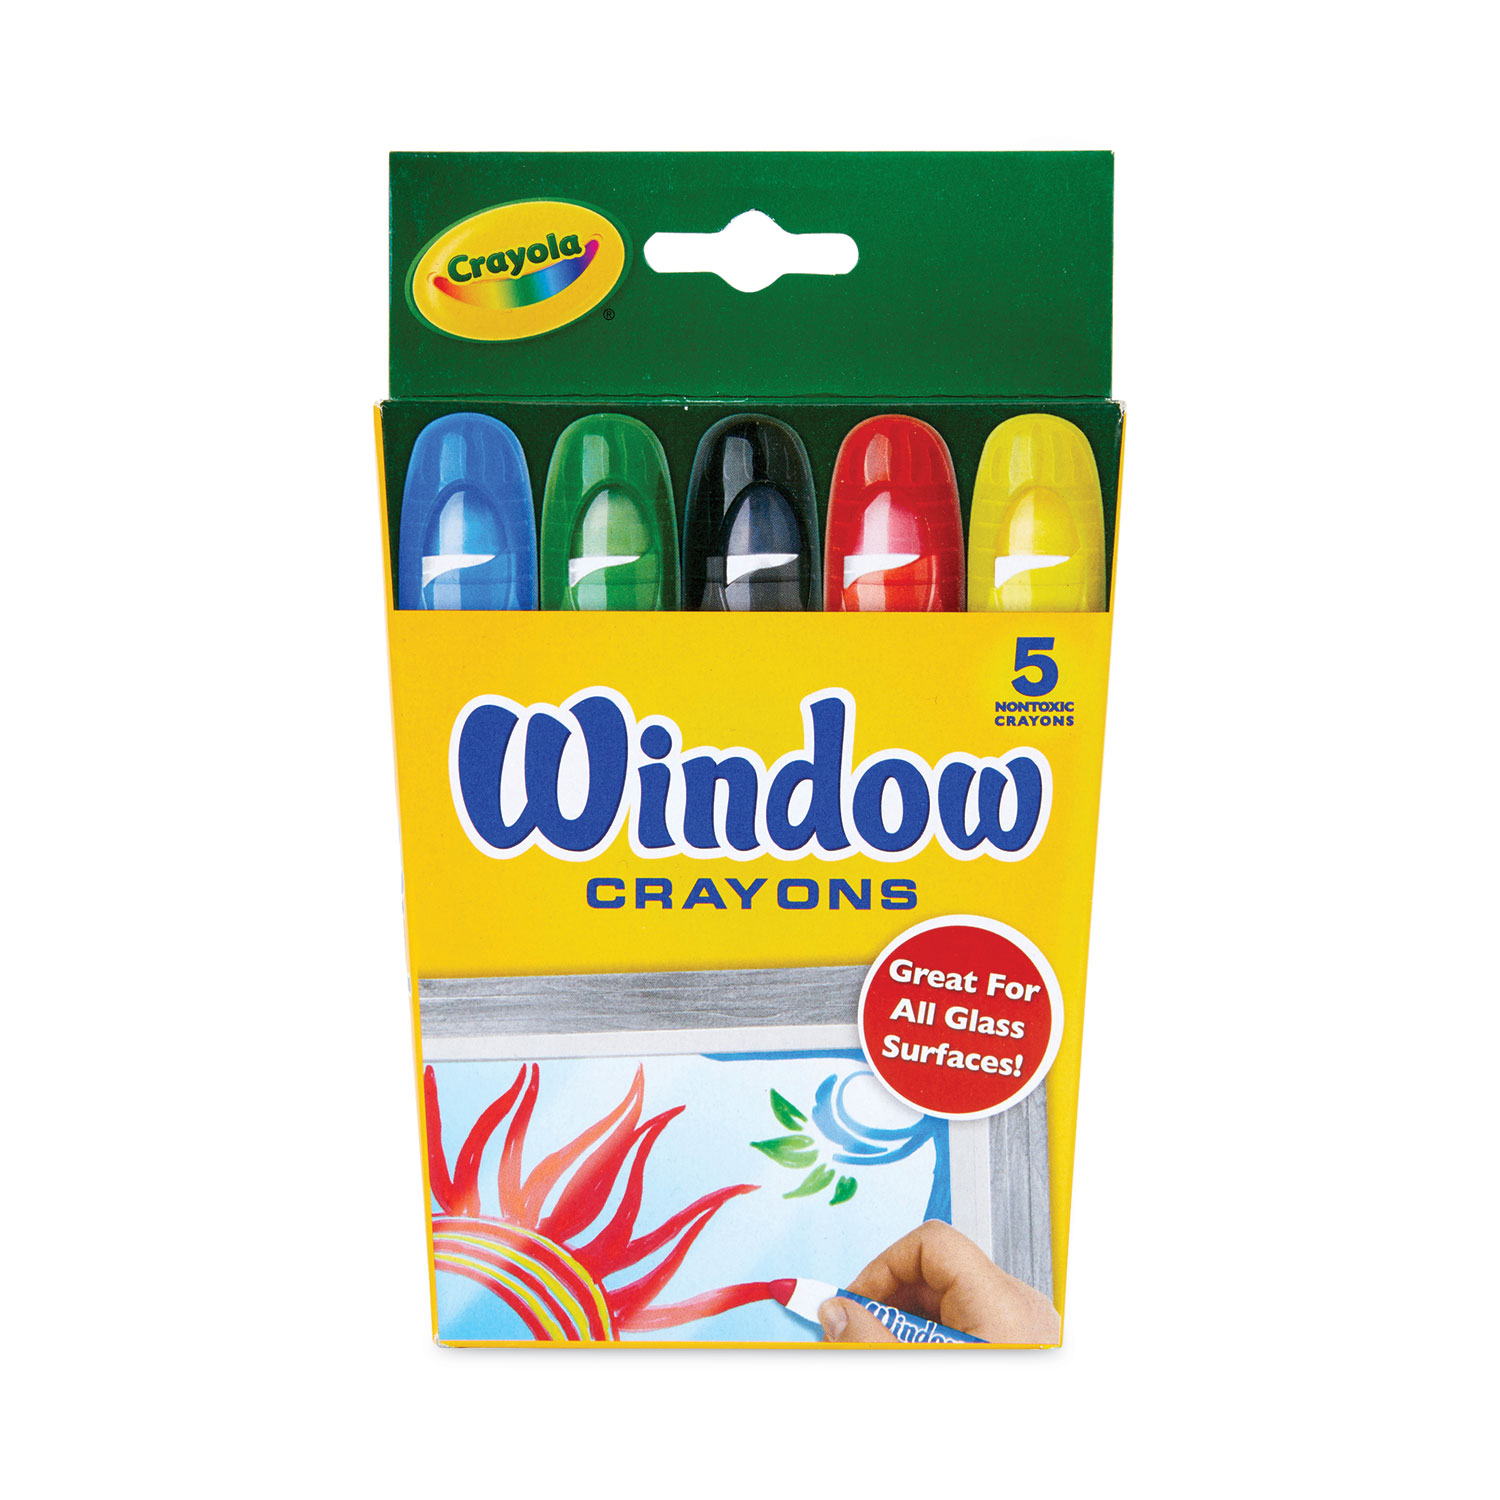 Crayola Twistables Crayons With Plastic Container Mini Size Assorted Colors  Pack Of 24 Crayons - Office Depot